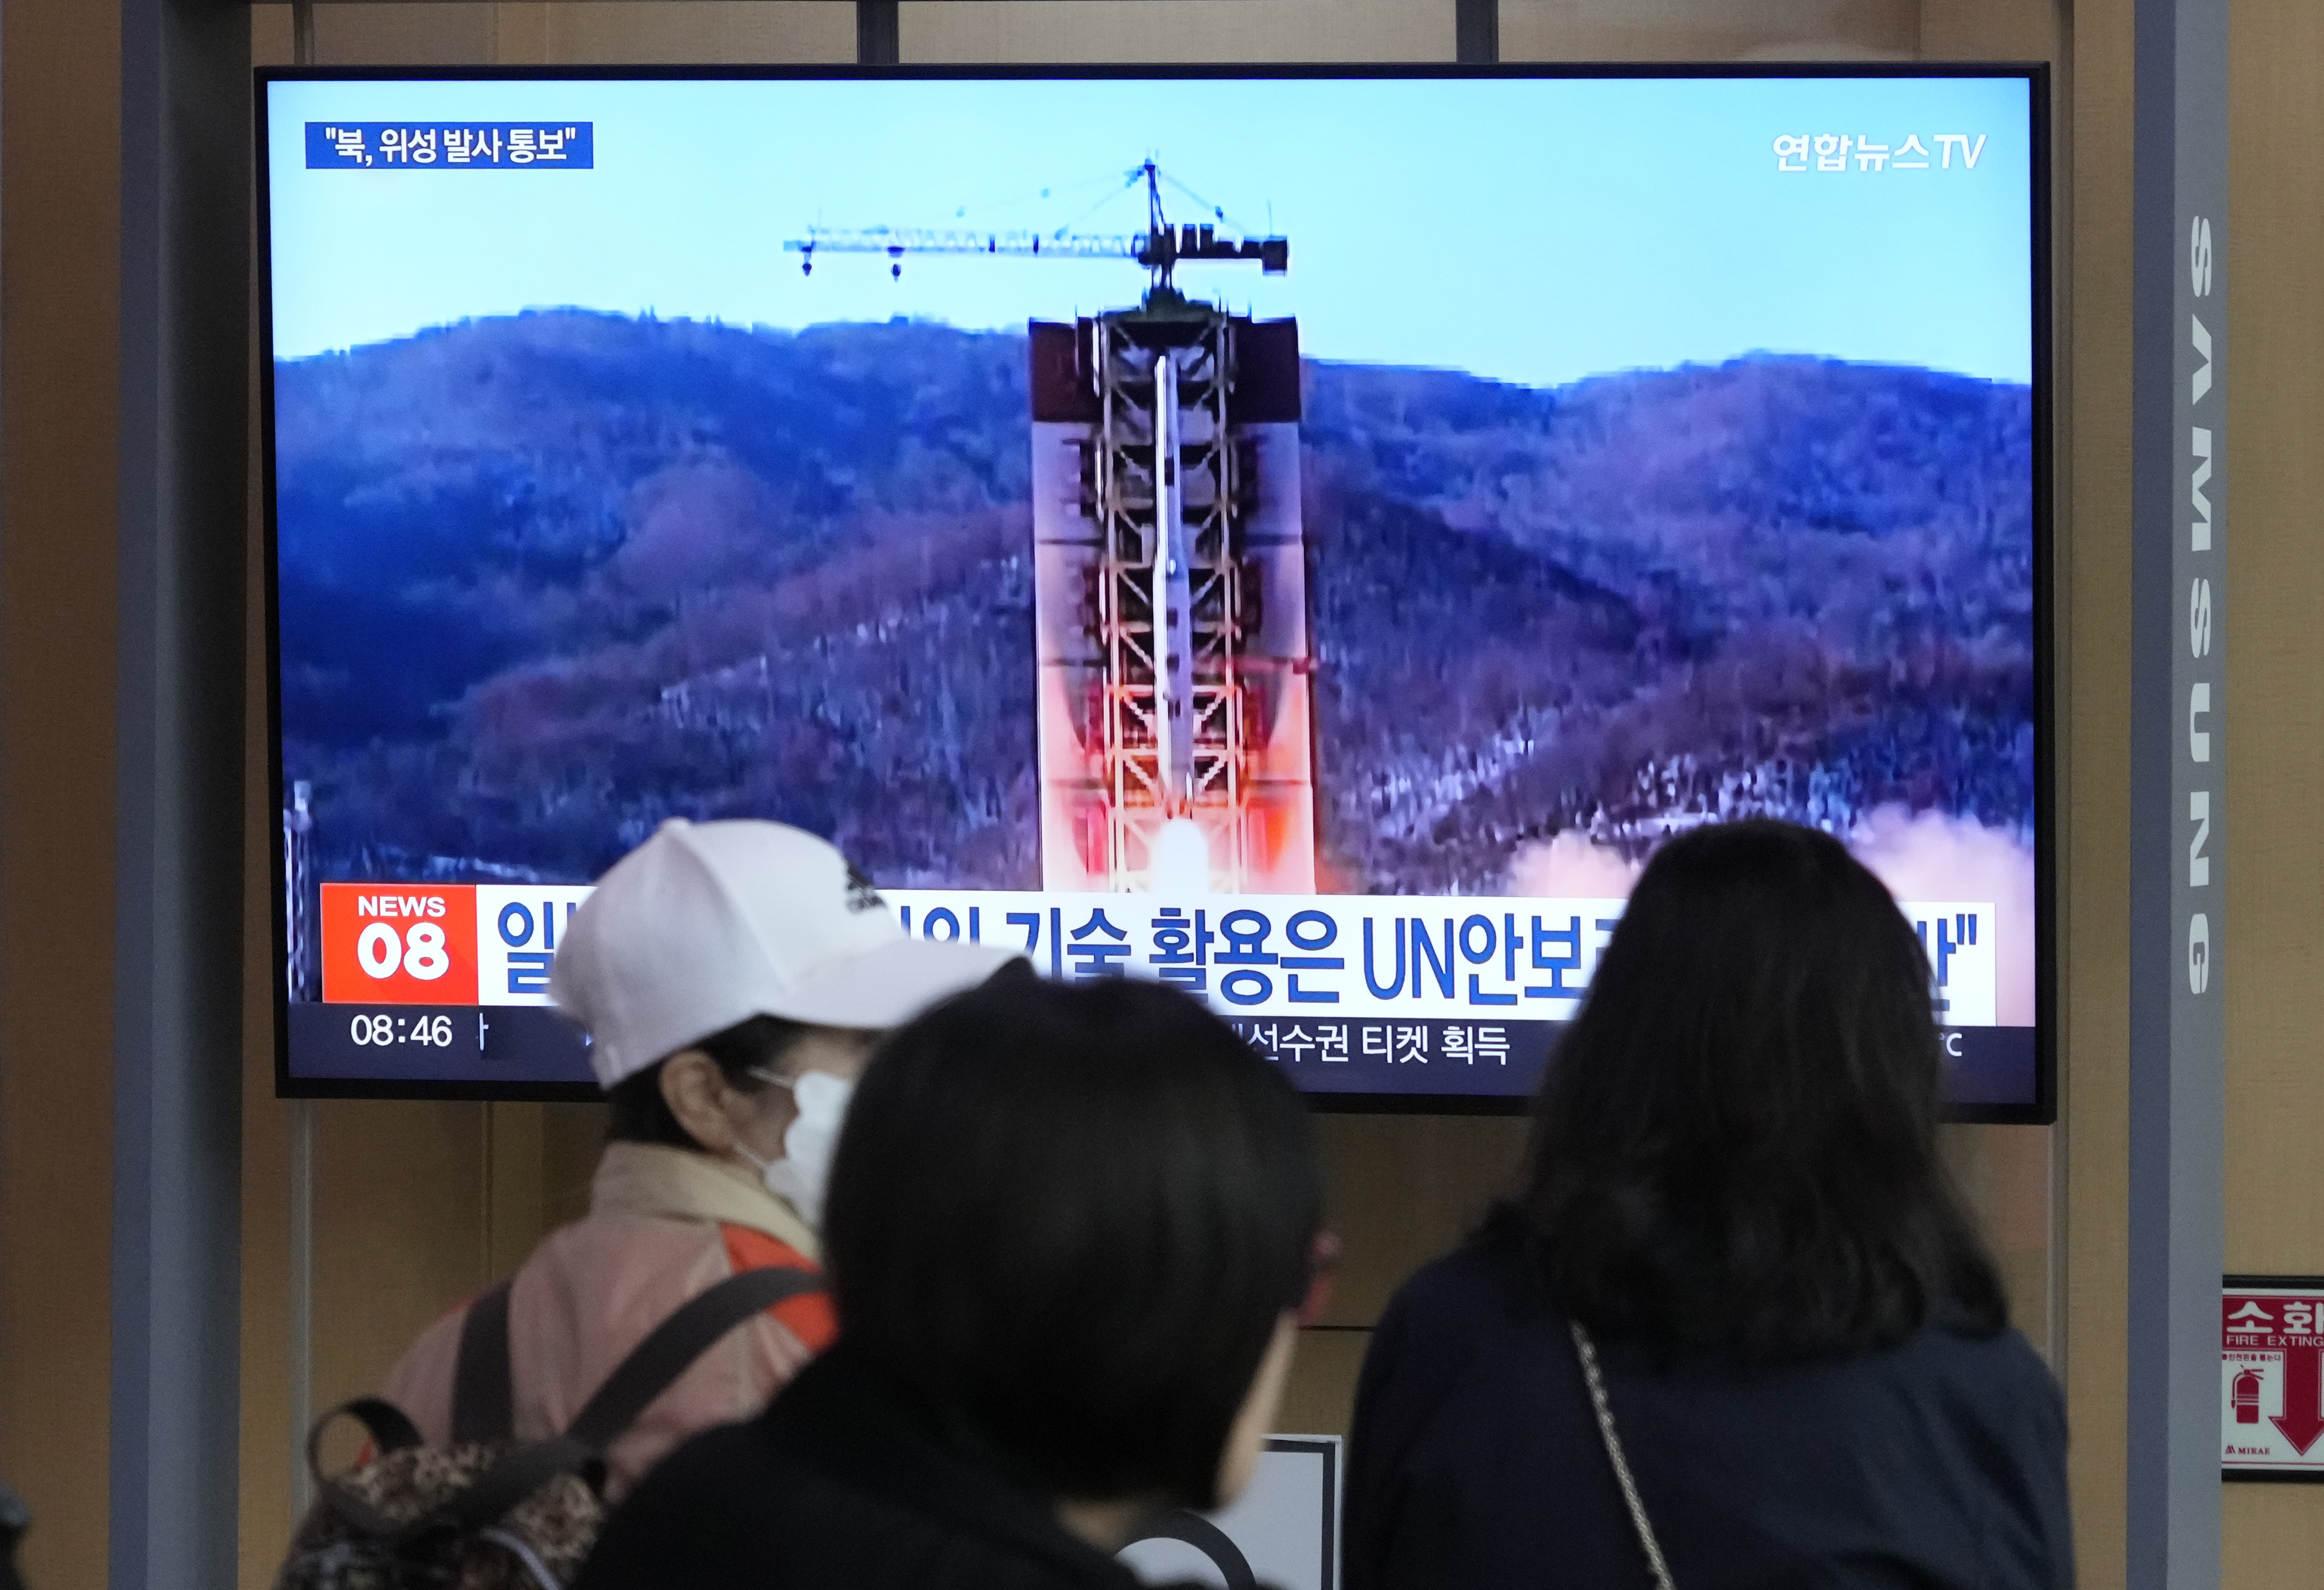 A TV screen shows a file image of North Korea's rocket launch during a news program at a railway station in Seoul. (Ahn Young-joon—AP Photo)